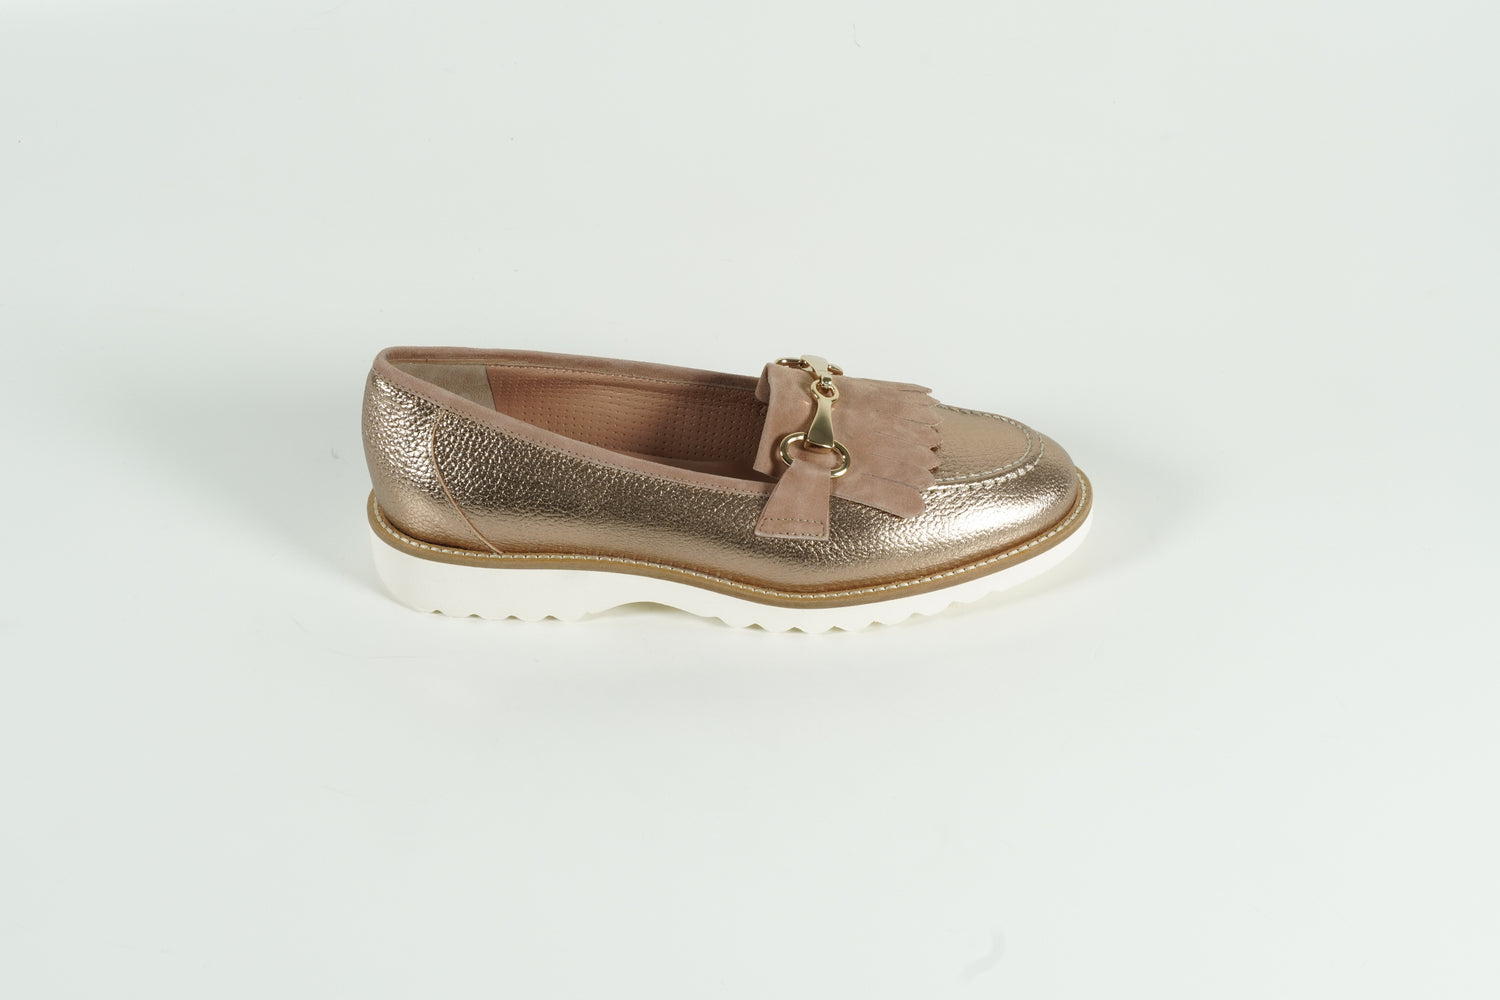 Moccasin Gold